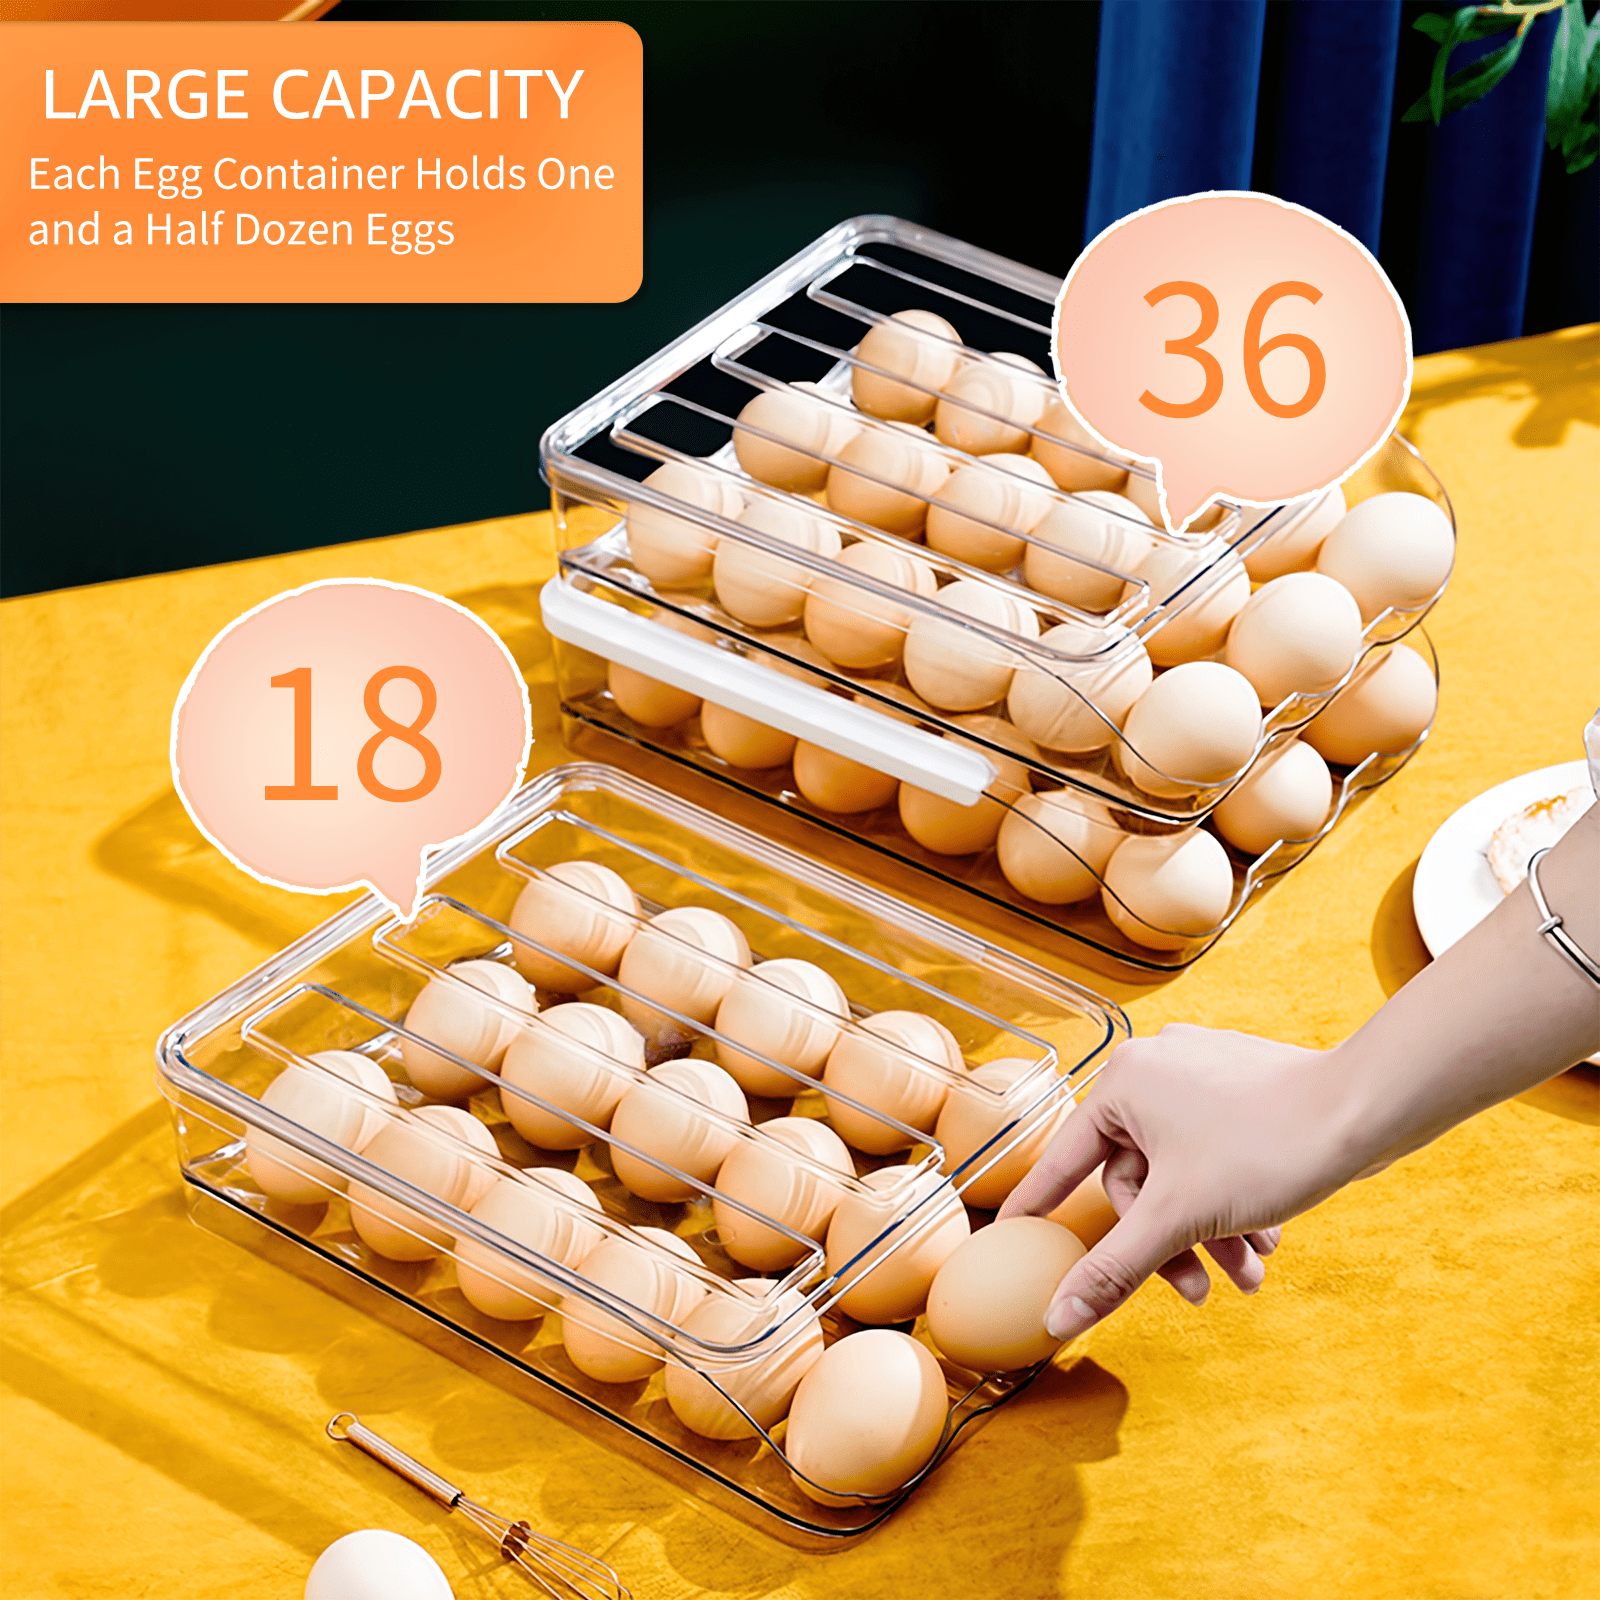 Dropship Egg Container Holder For Refrigerator Double Layer Egg Storage Box  With Lid Automatic Rolling Egg Box Organizer Bin Tray Rack 36 Eggs to Sell  Online at a Lower Price